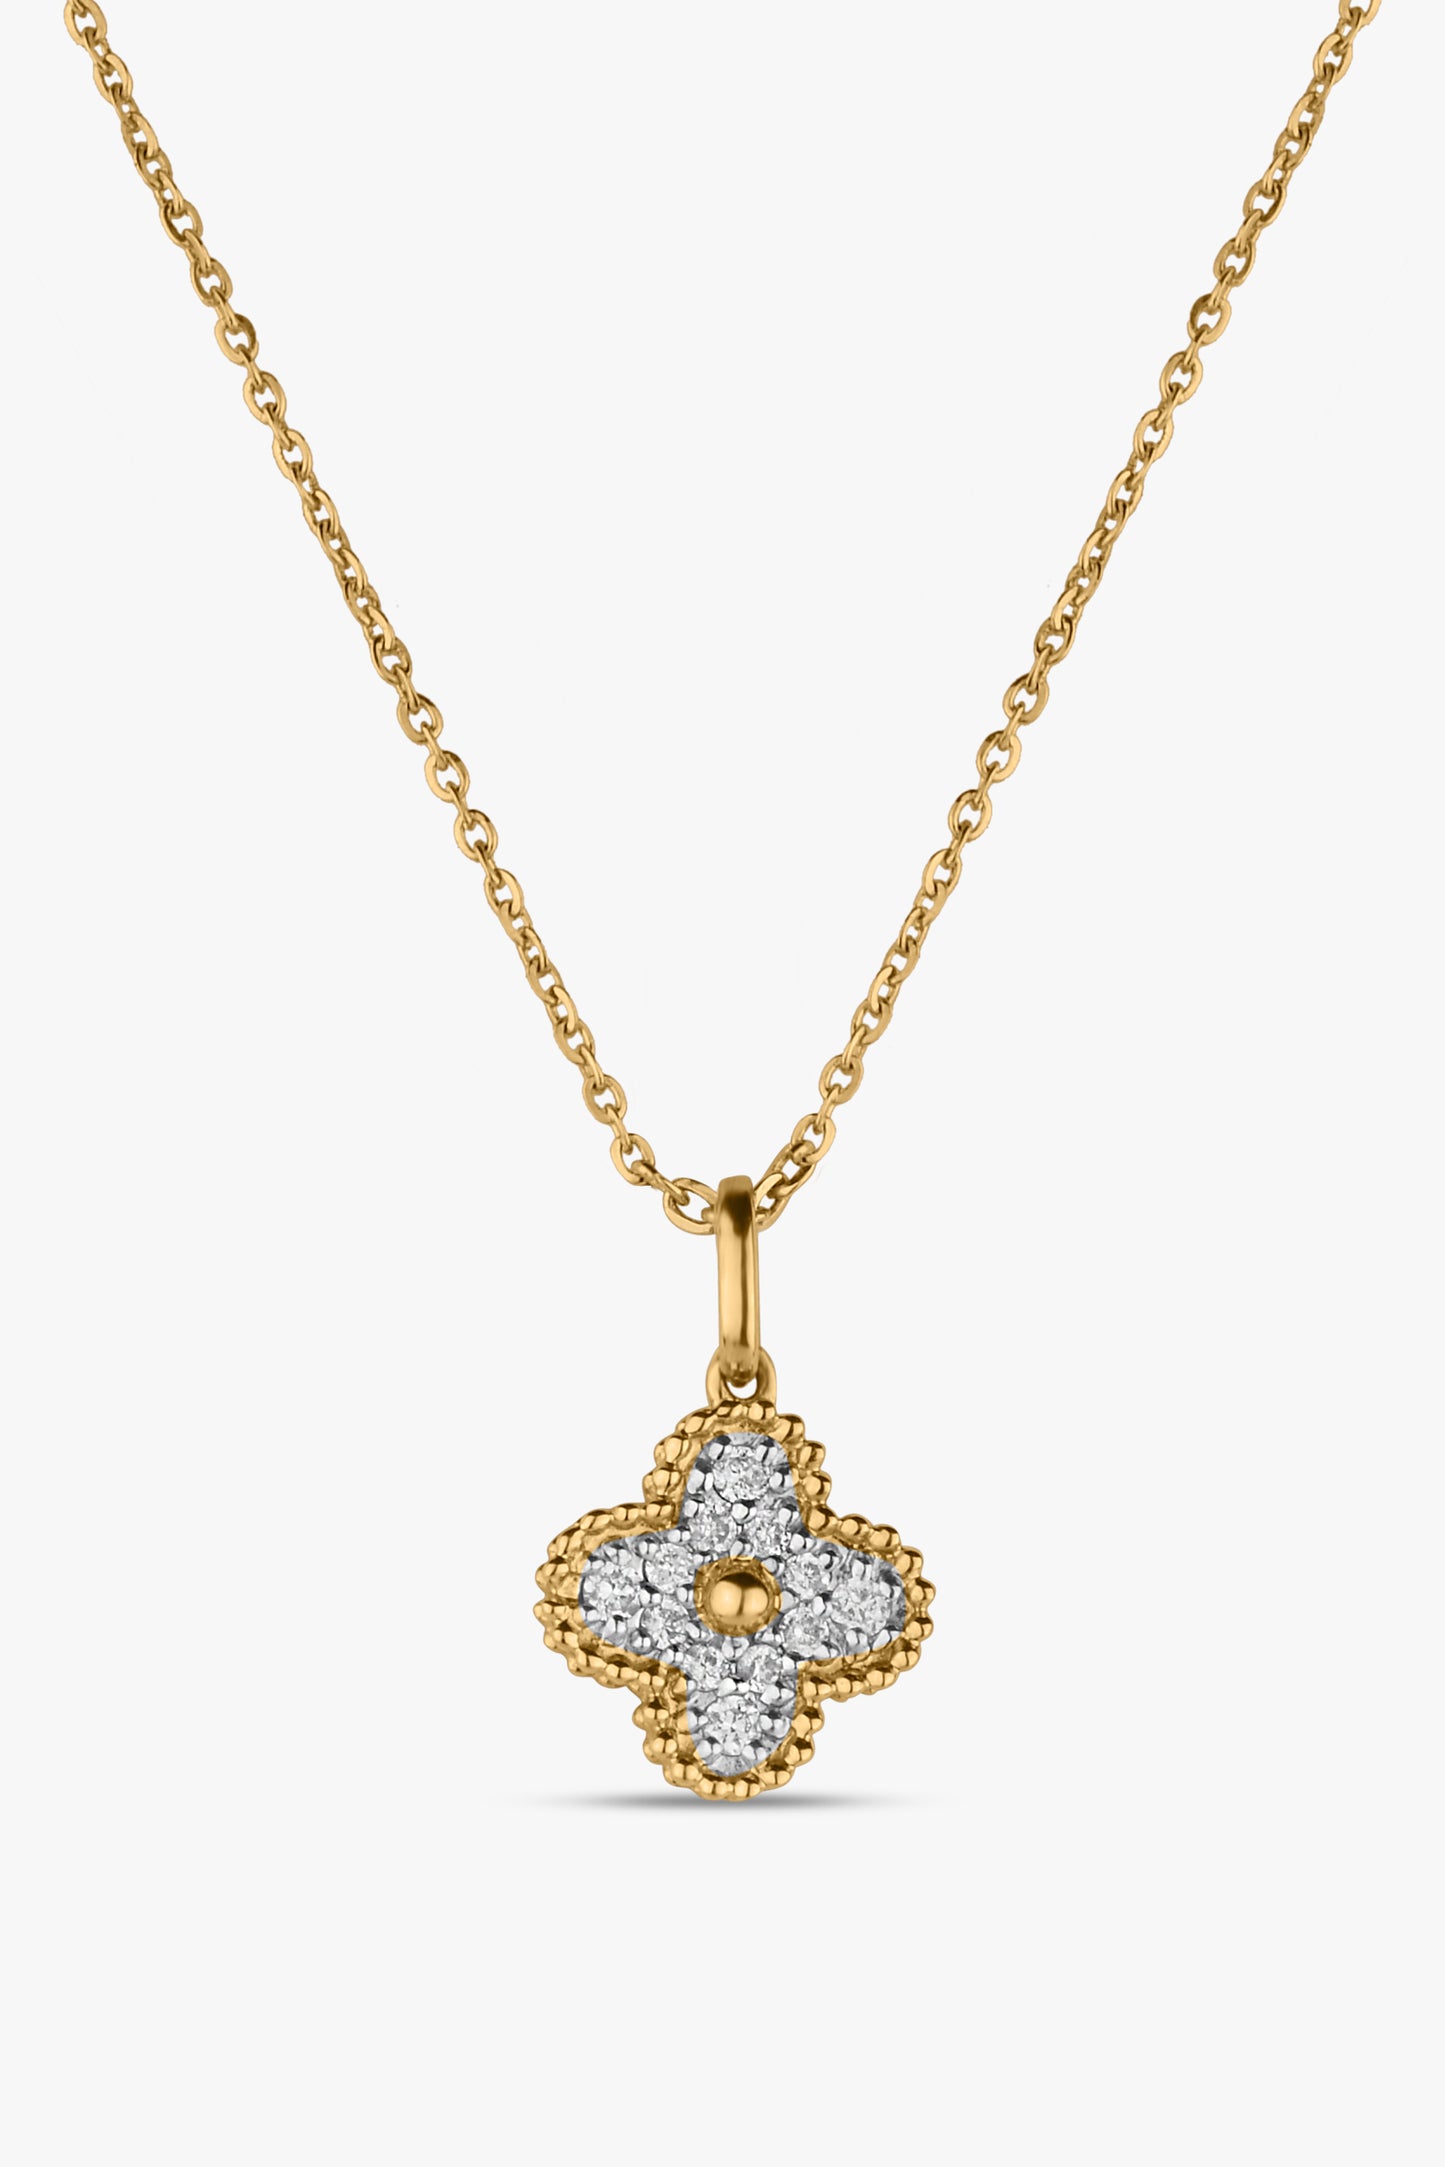 Load image into Gallery viewer, Clover Necklace
